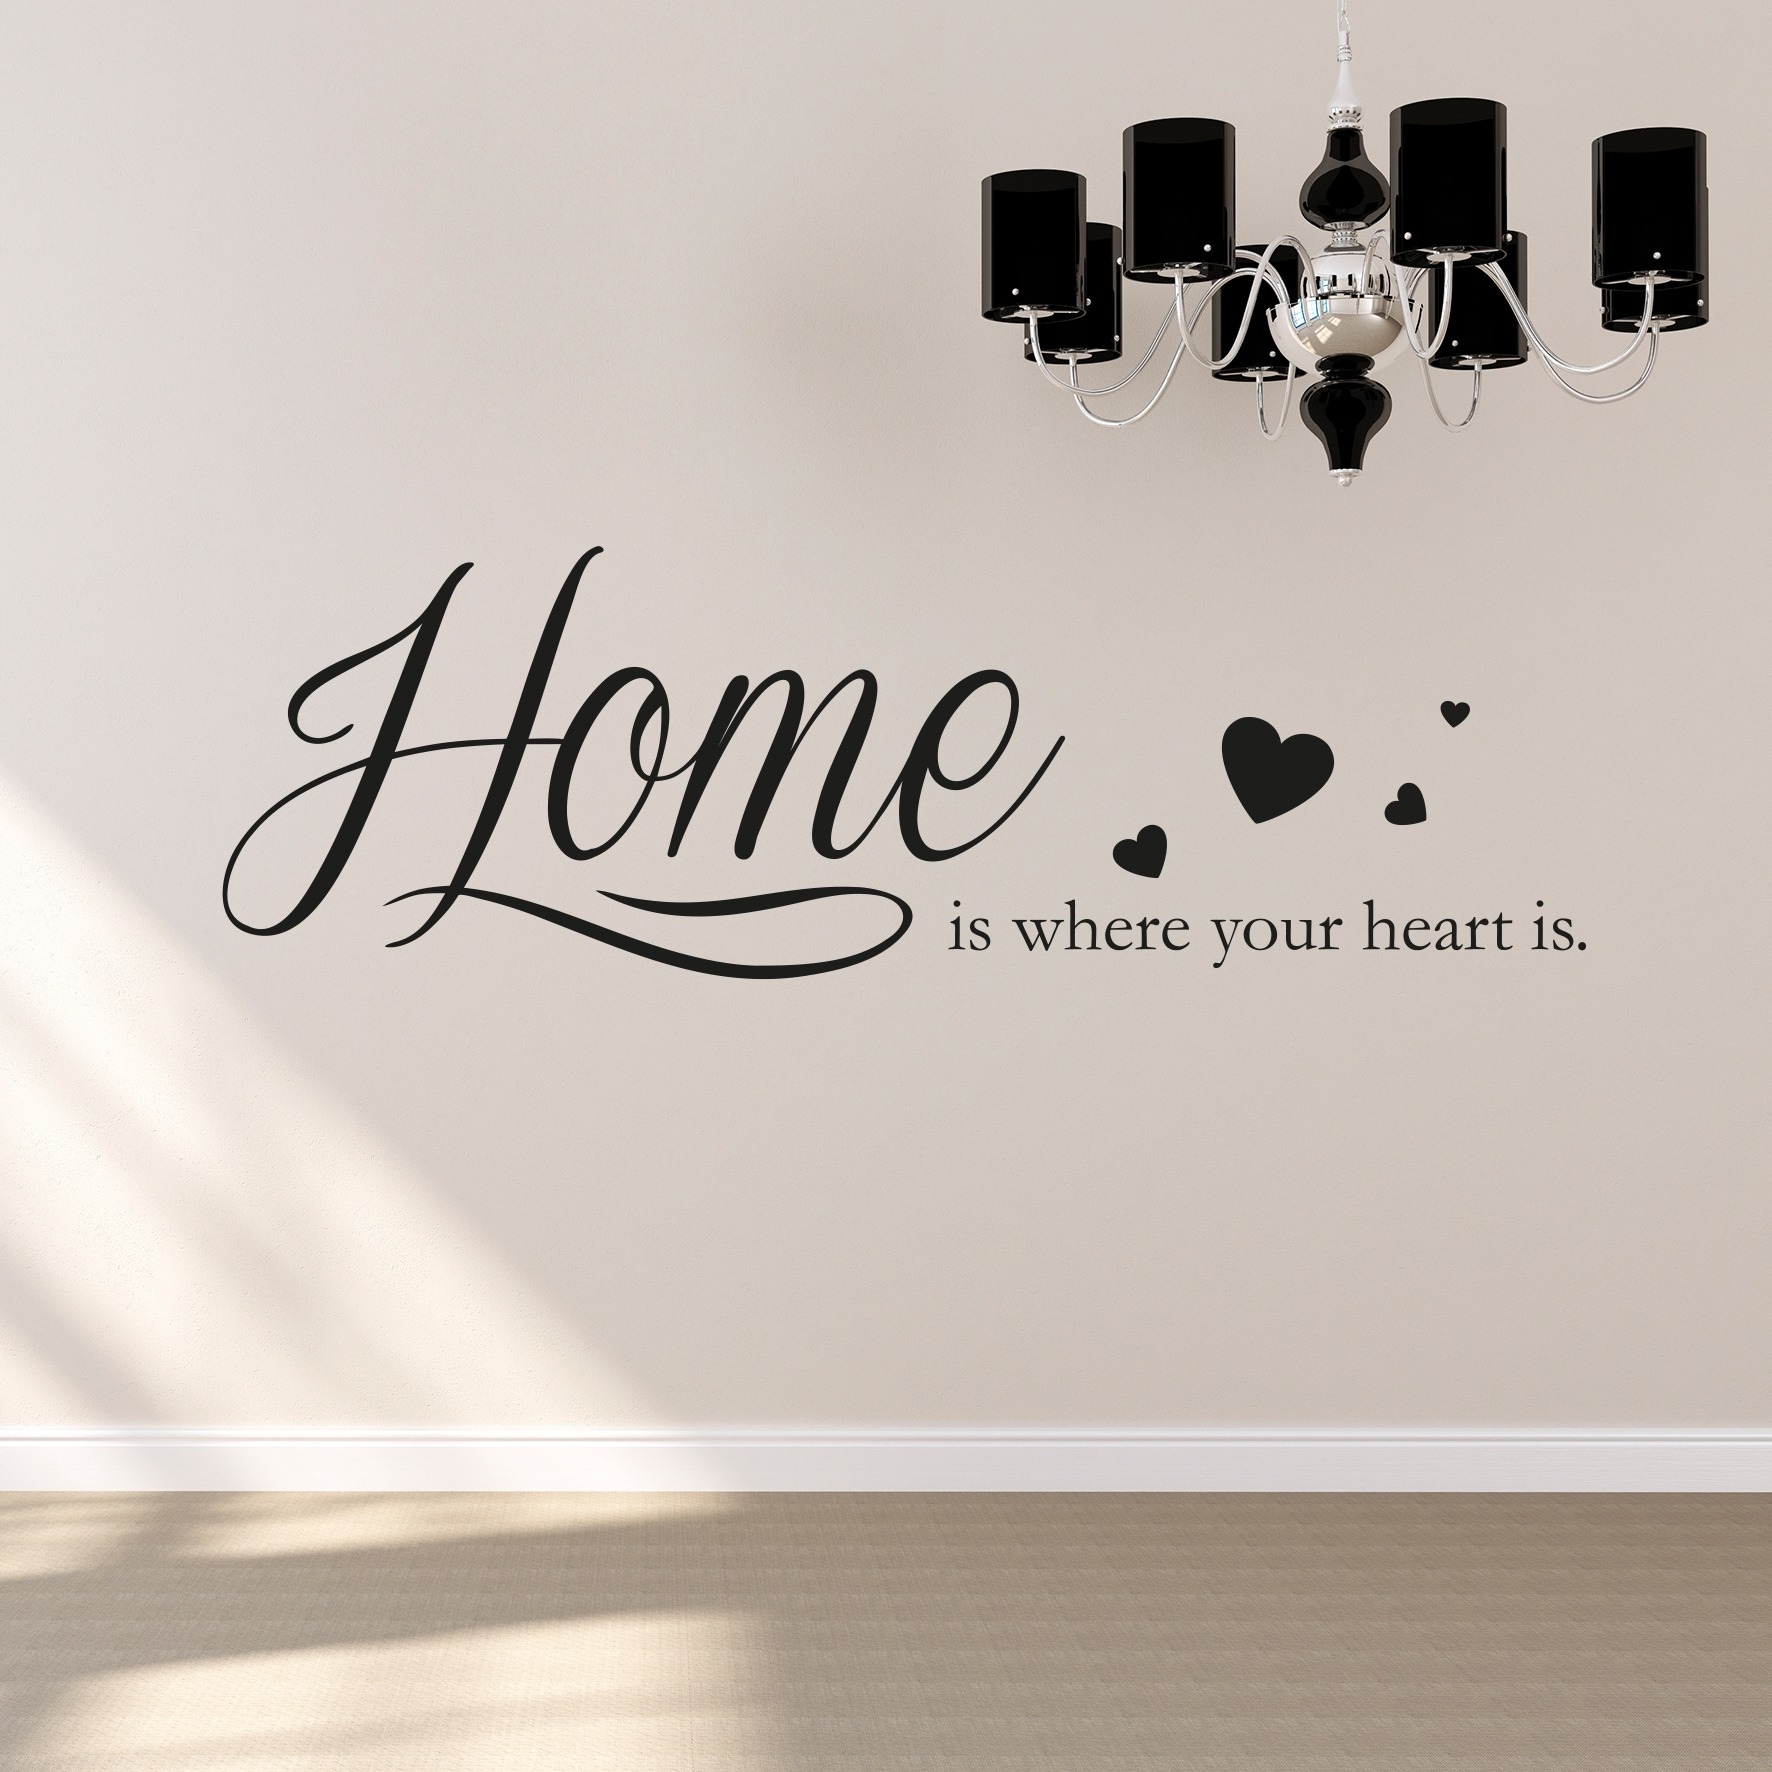 queence Wandtattoo »Home kaufen is«, heart your x cm | where BAUR 120 30 is